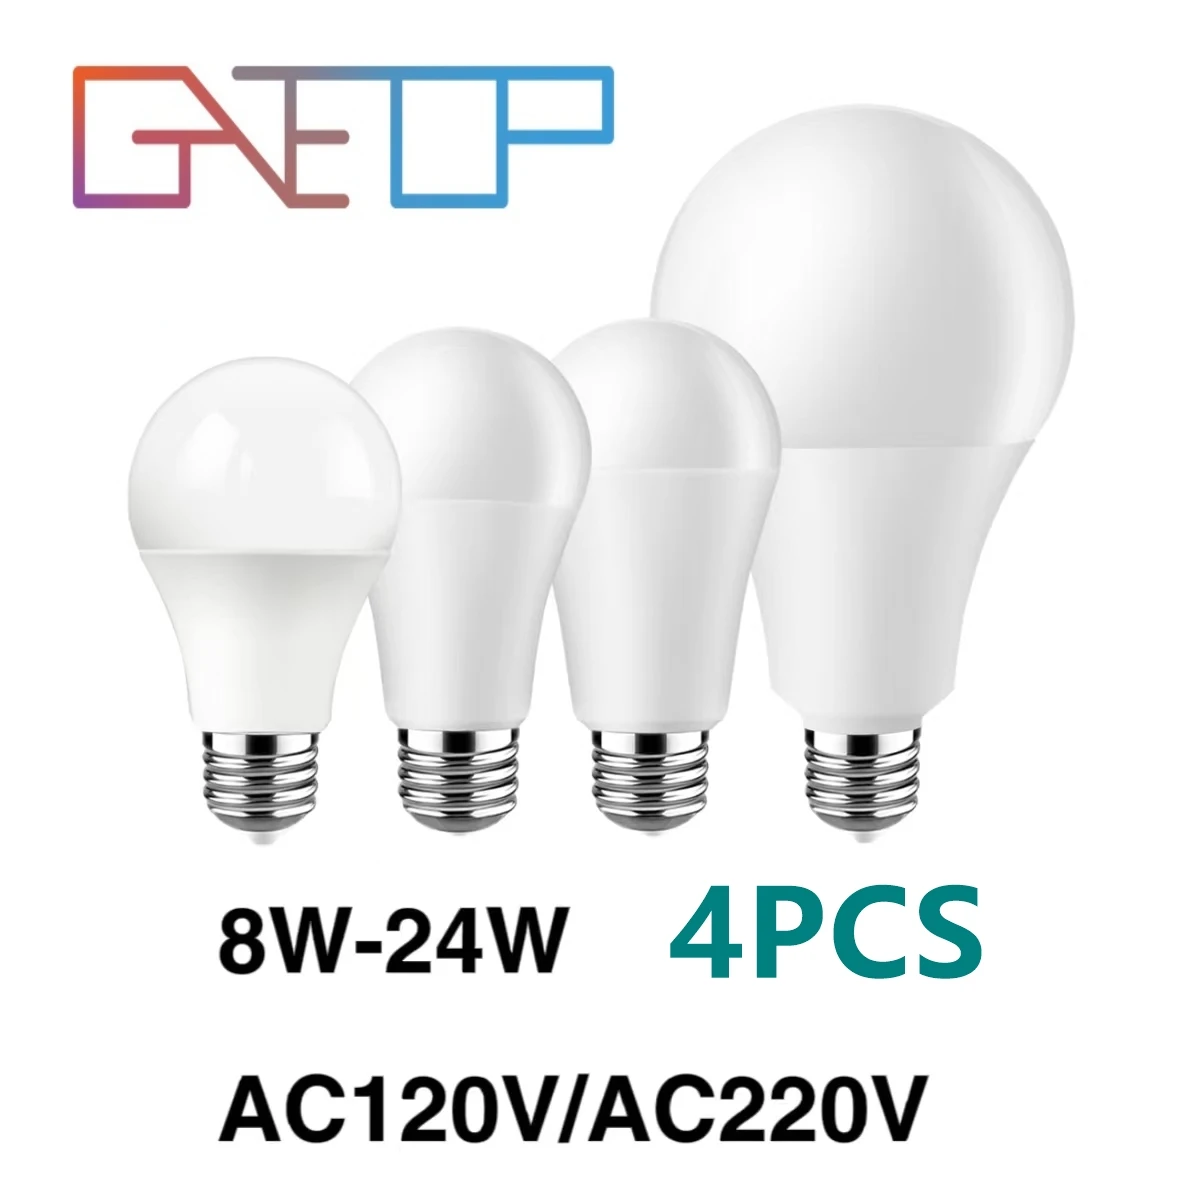 

4pcs/LOT Led Bulb Lamps E27 B22 AC120V/AC220V Power 8W 9W 10W 12W 15W 18W 20W 24W Warm White Day White Cold White Lamps for Home